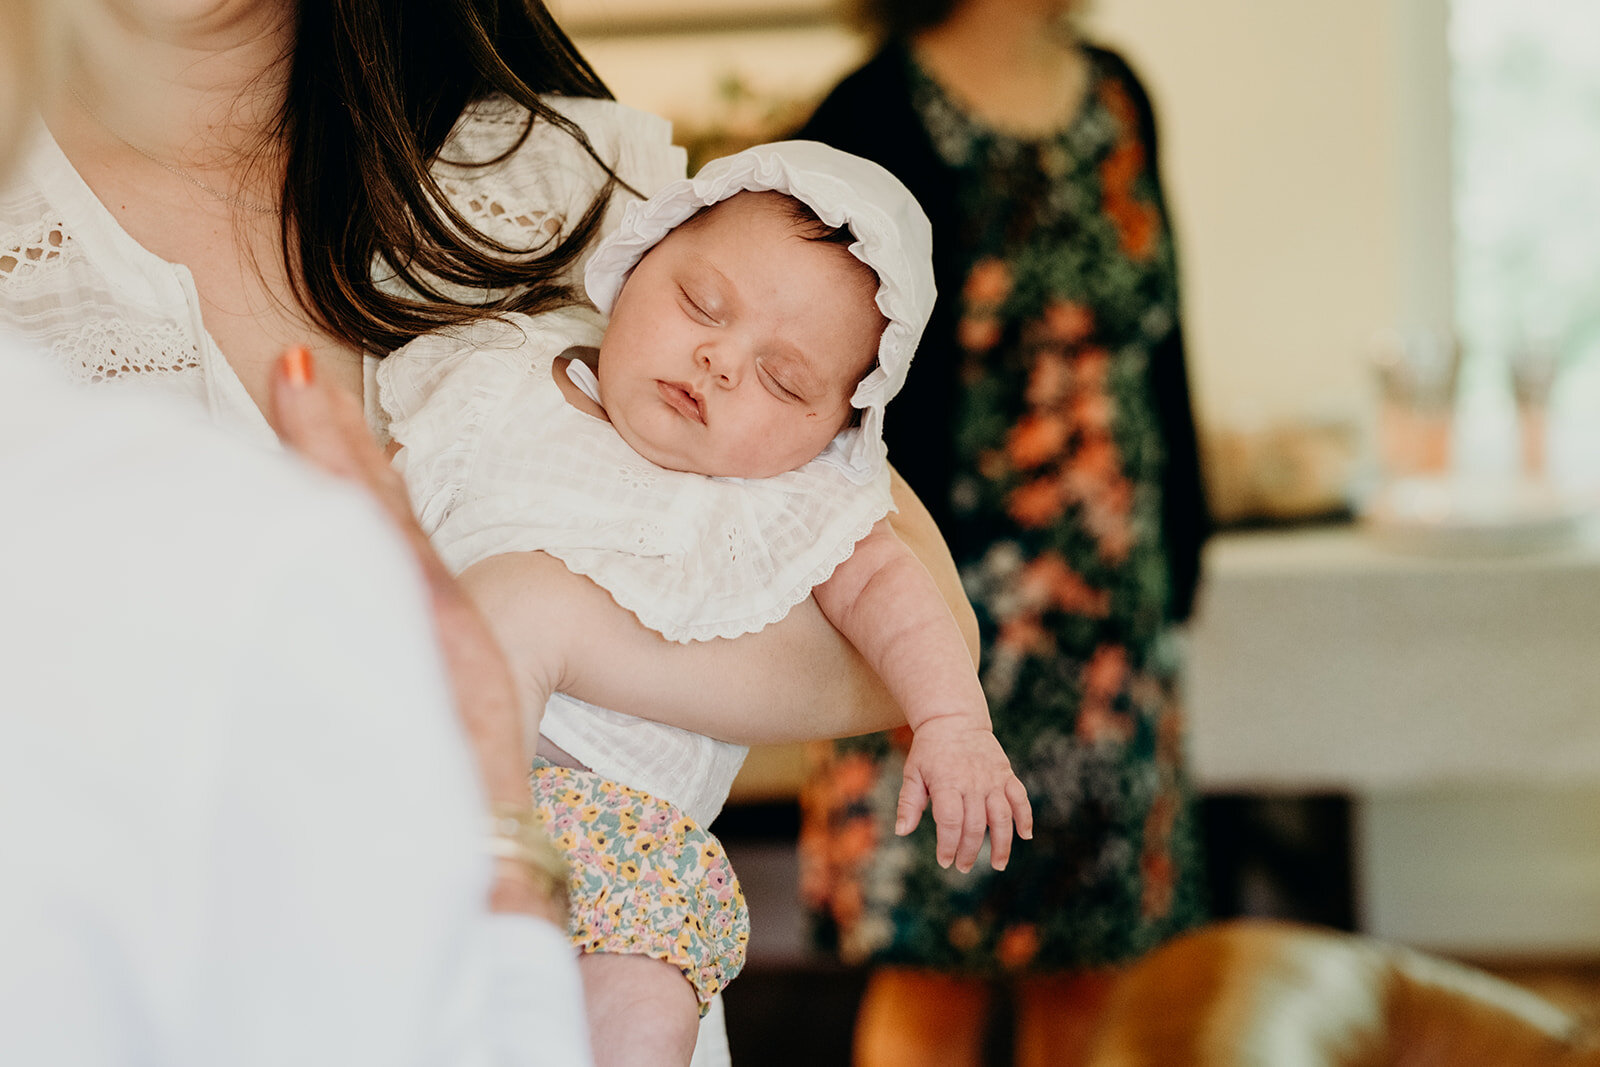 A baby girl falls asleep before the Jewish naming ceremony.